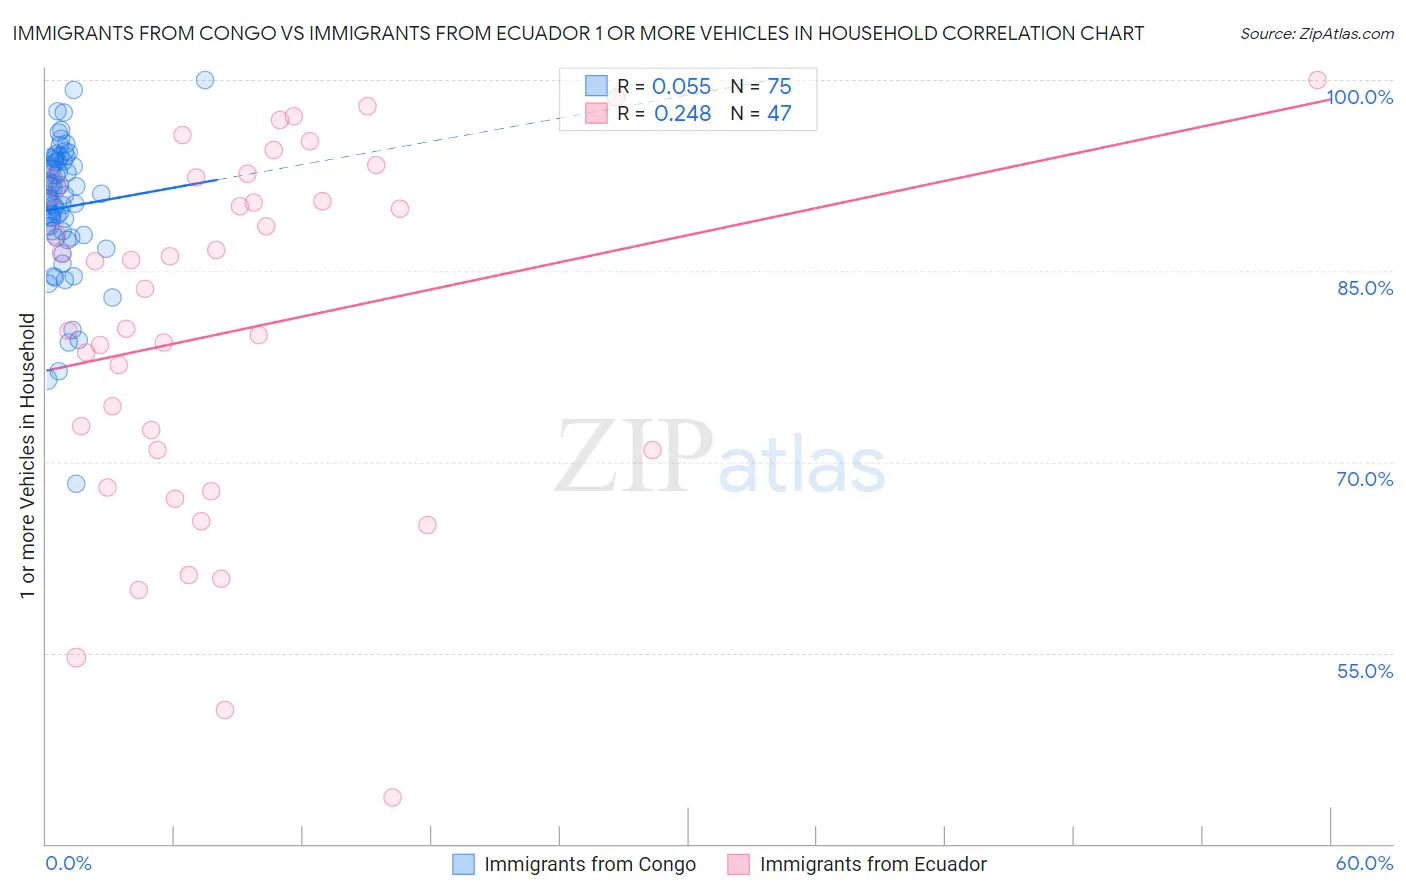 Immigrants from Congo vs Immigrants from Ecuador 1 or more Vehicles in Household